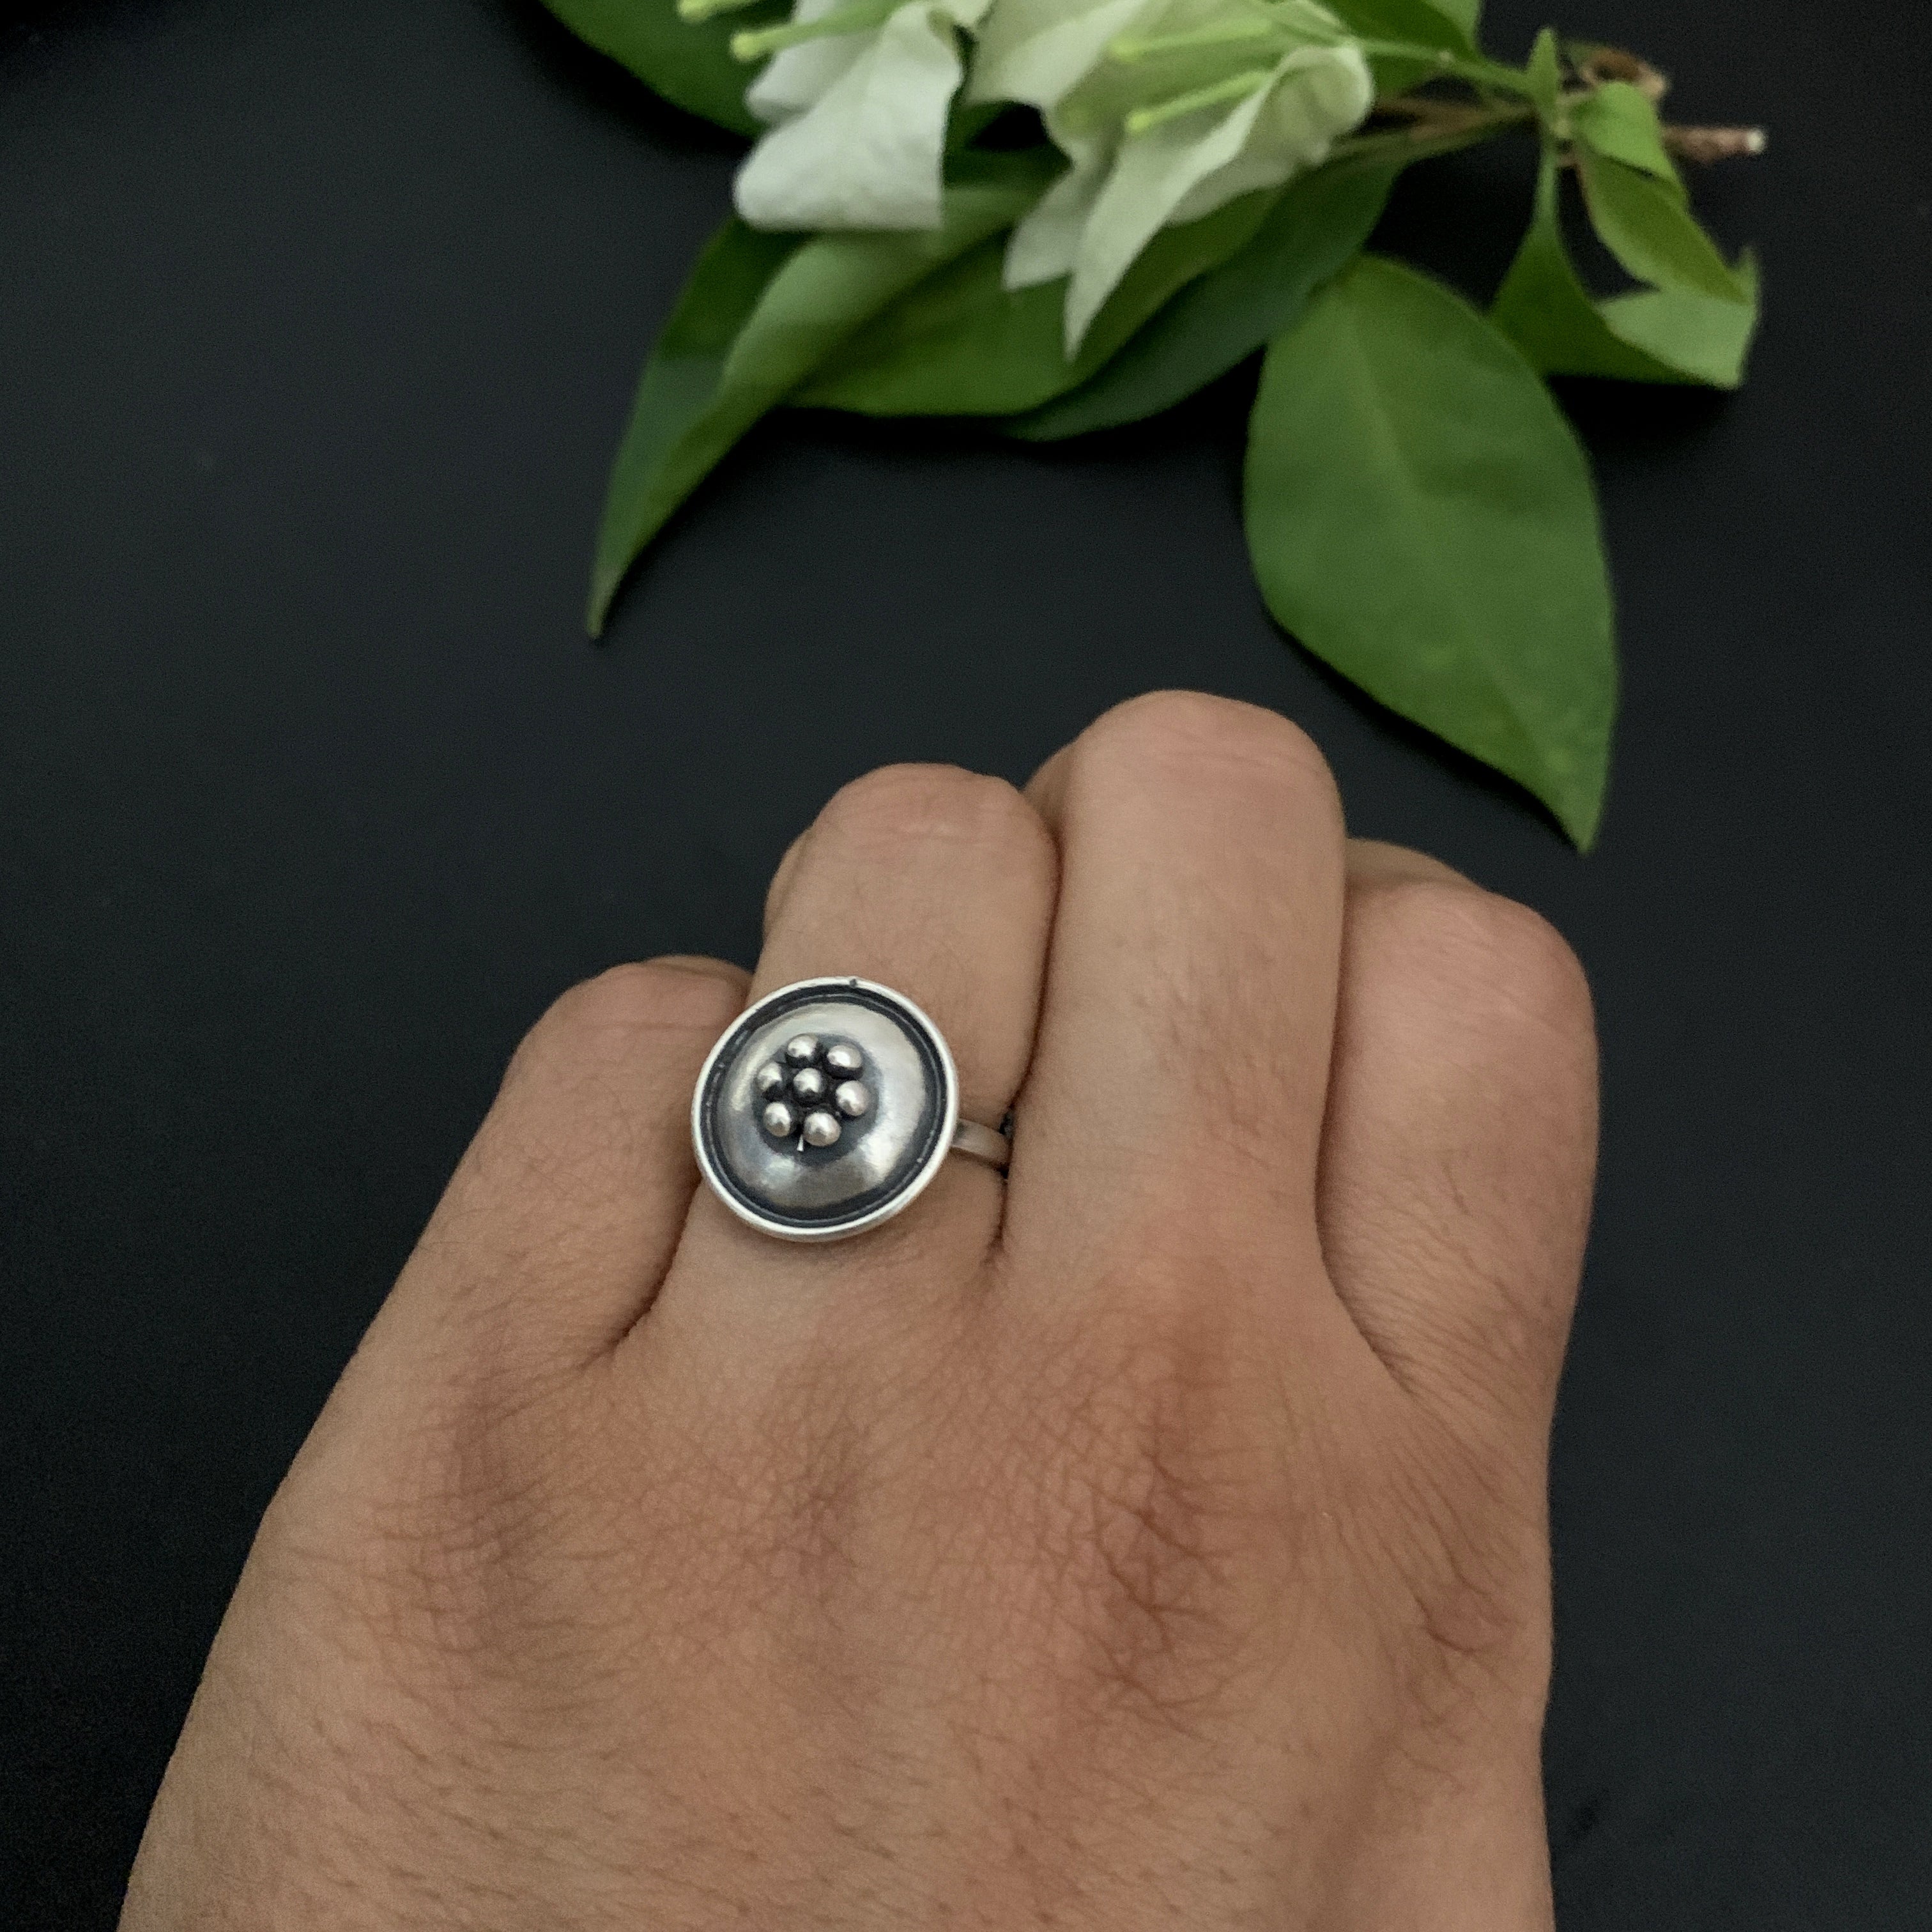 a person wearing a ring with a button on it